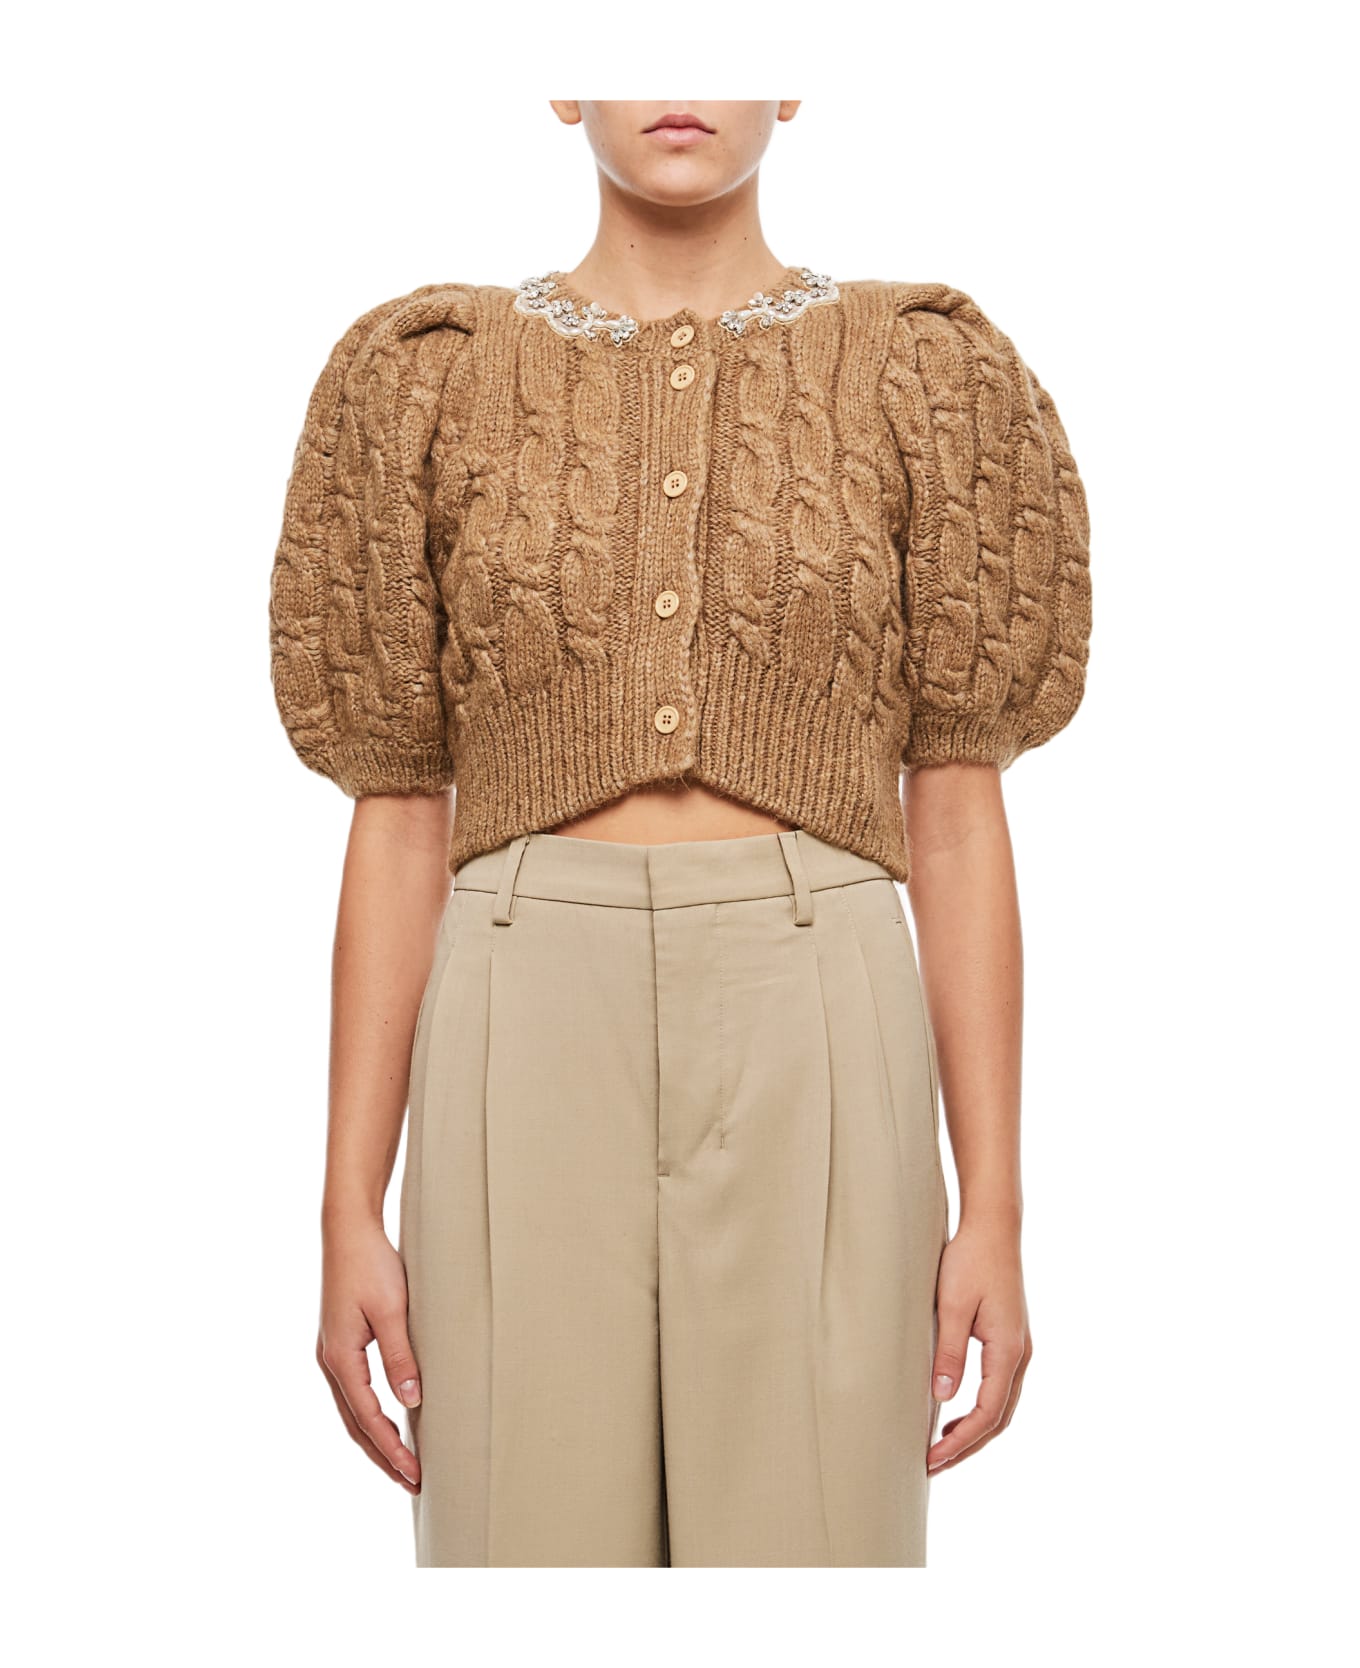 Simone Rocha Cropped Cable Puff Sleeve Cardigan - Beige